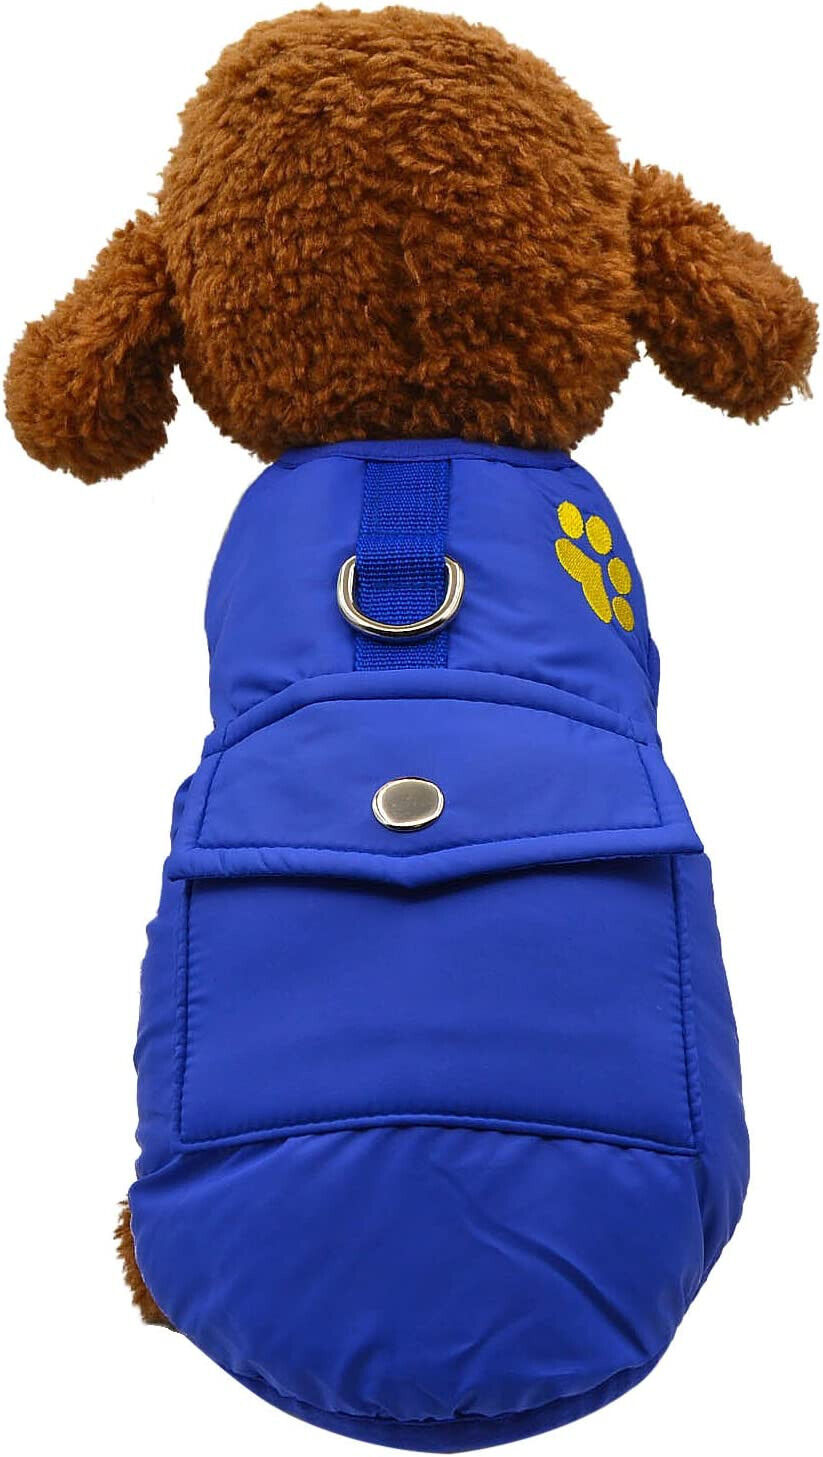 Dog Thick Warm Winter Coat Blue Medium Large 23-inch long 26-inch chest